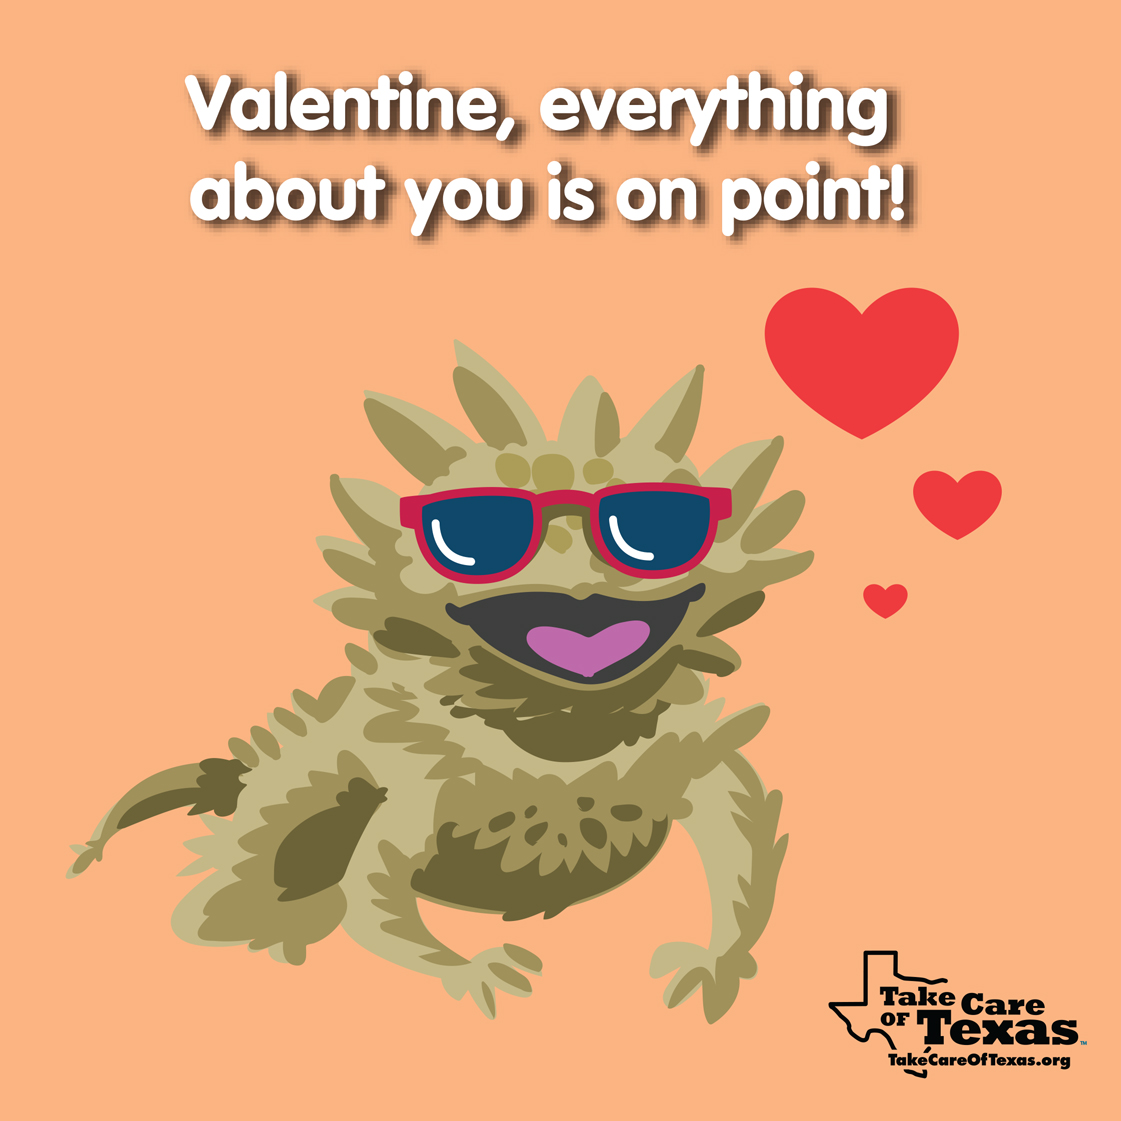 Horned Toad with the text "Valentine, everything about you is on point!"